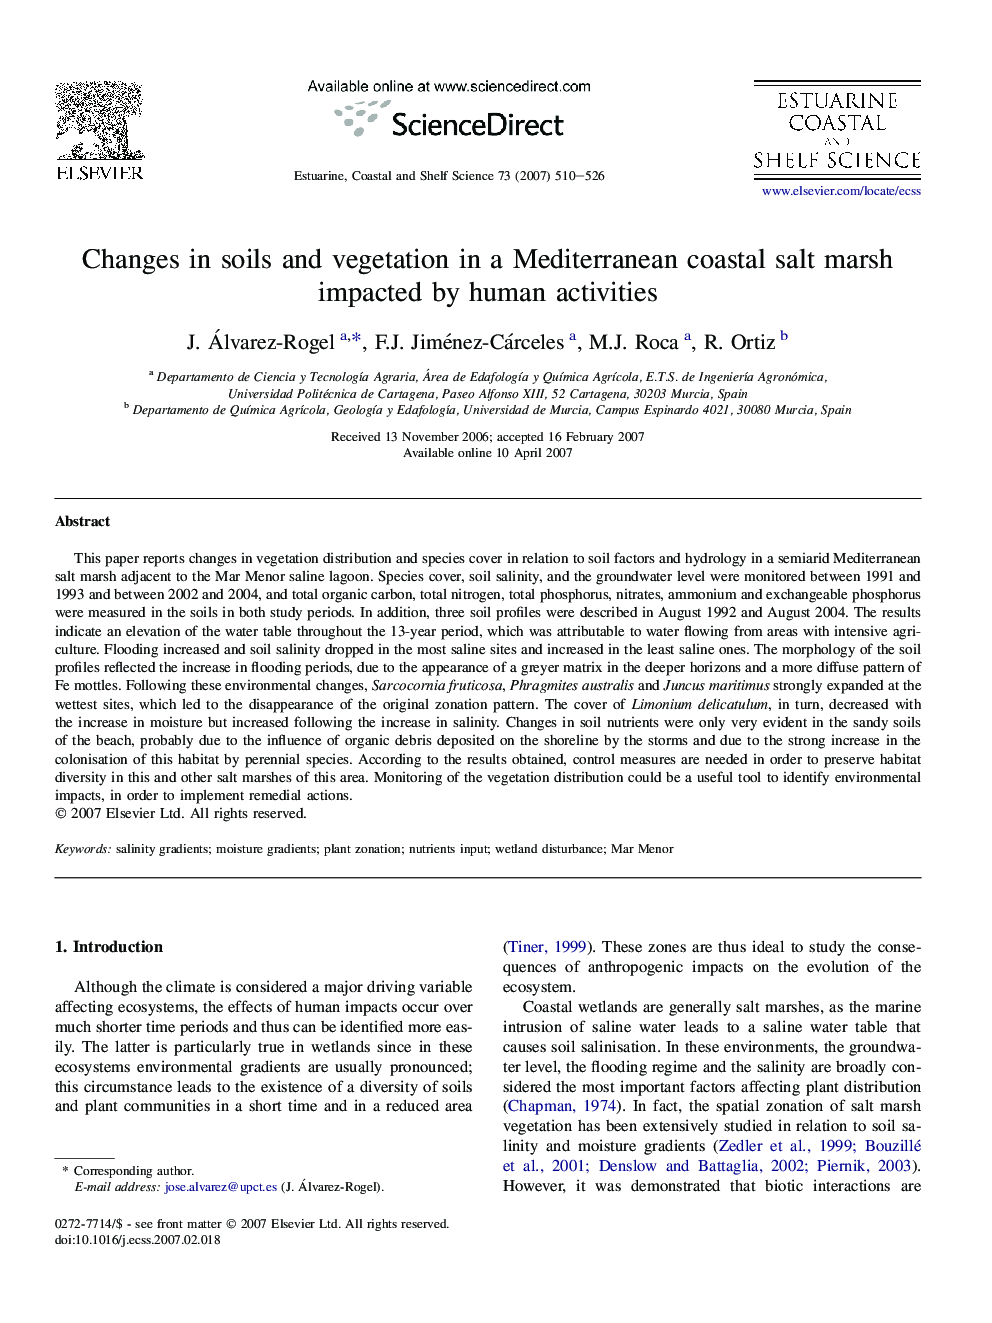 Changes in soils and vegetation in a Mediterranean coastal salt marsh impacted by human activities